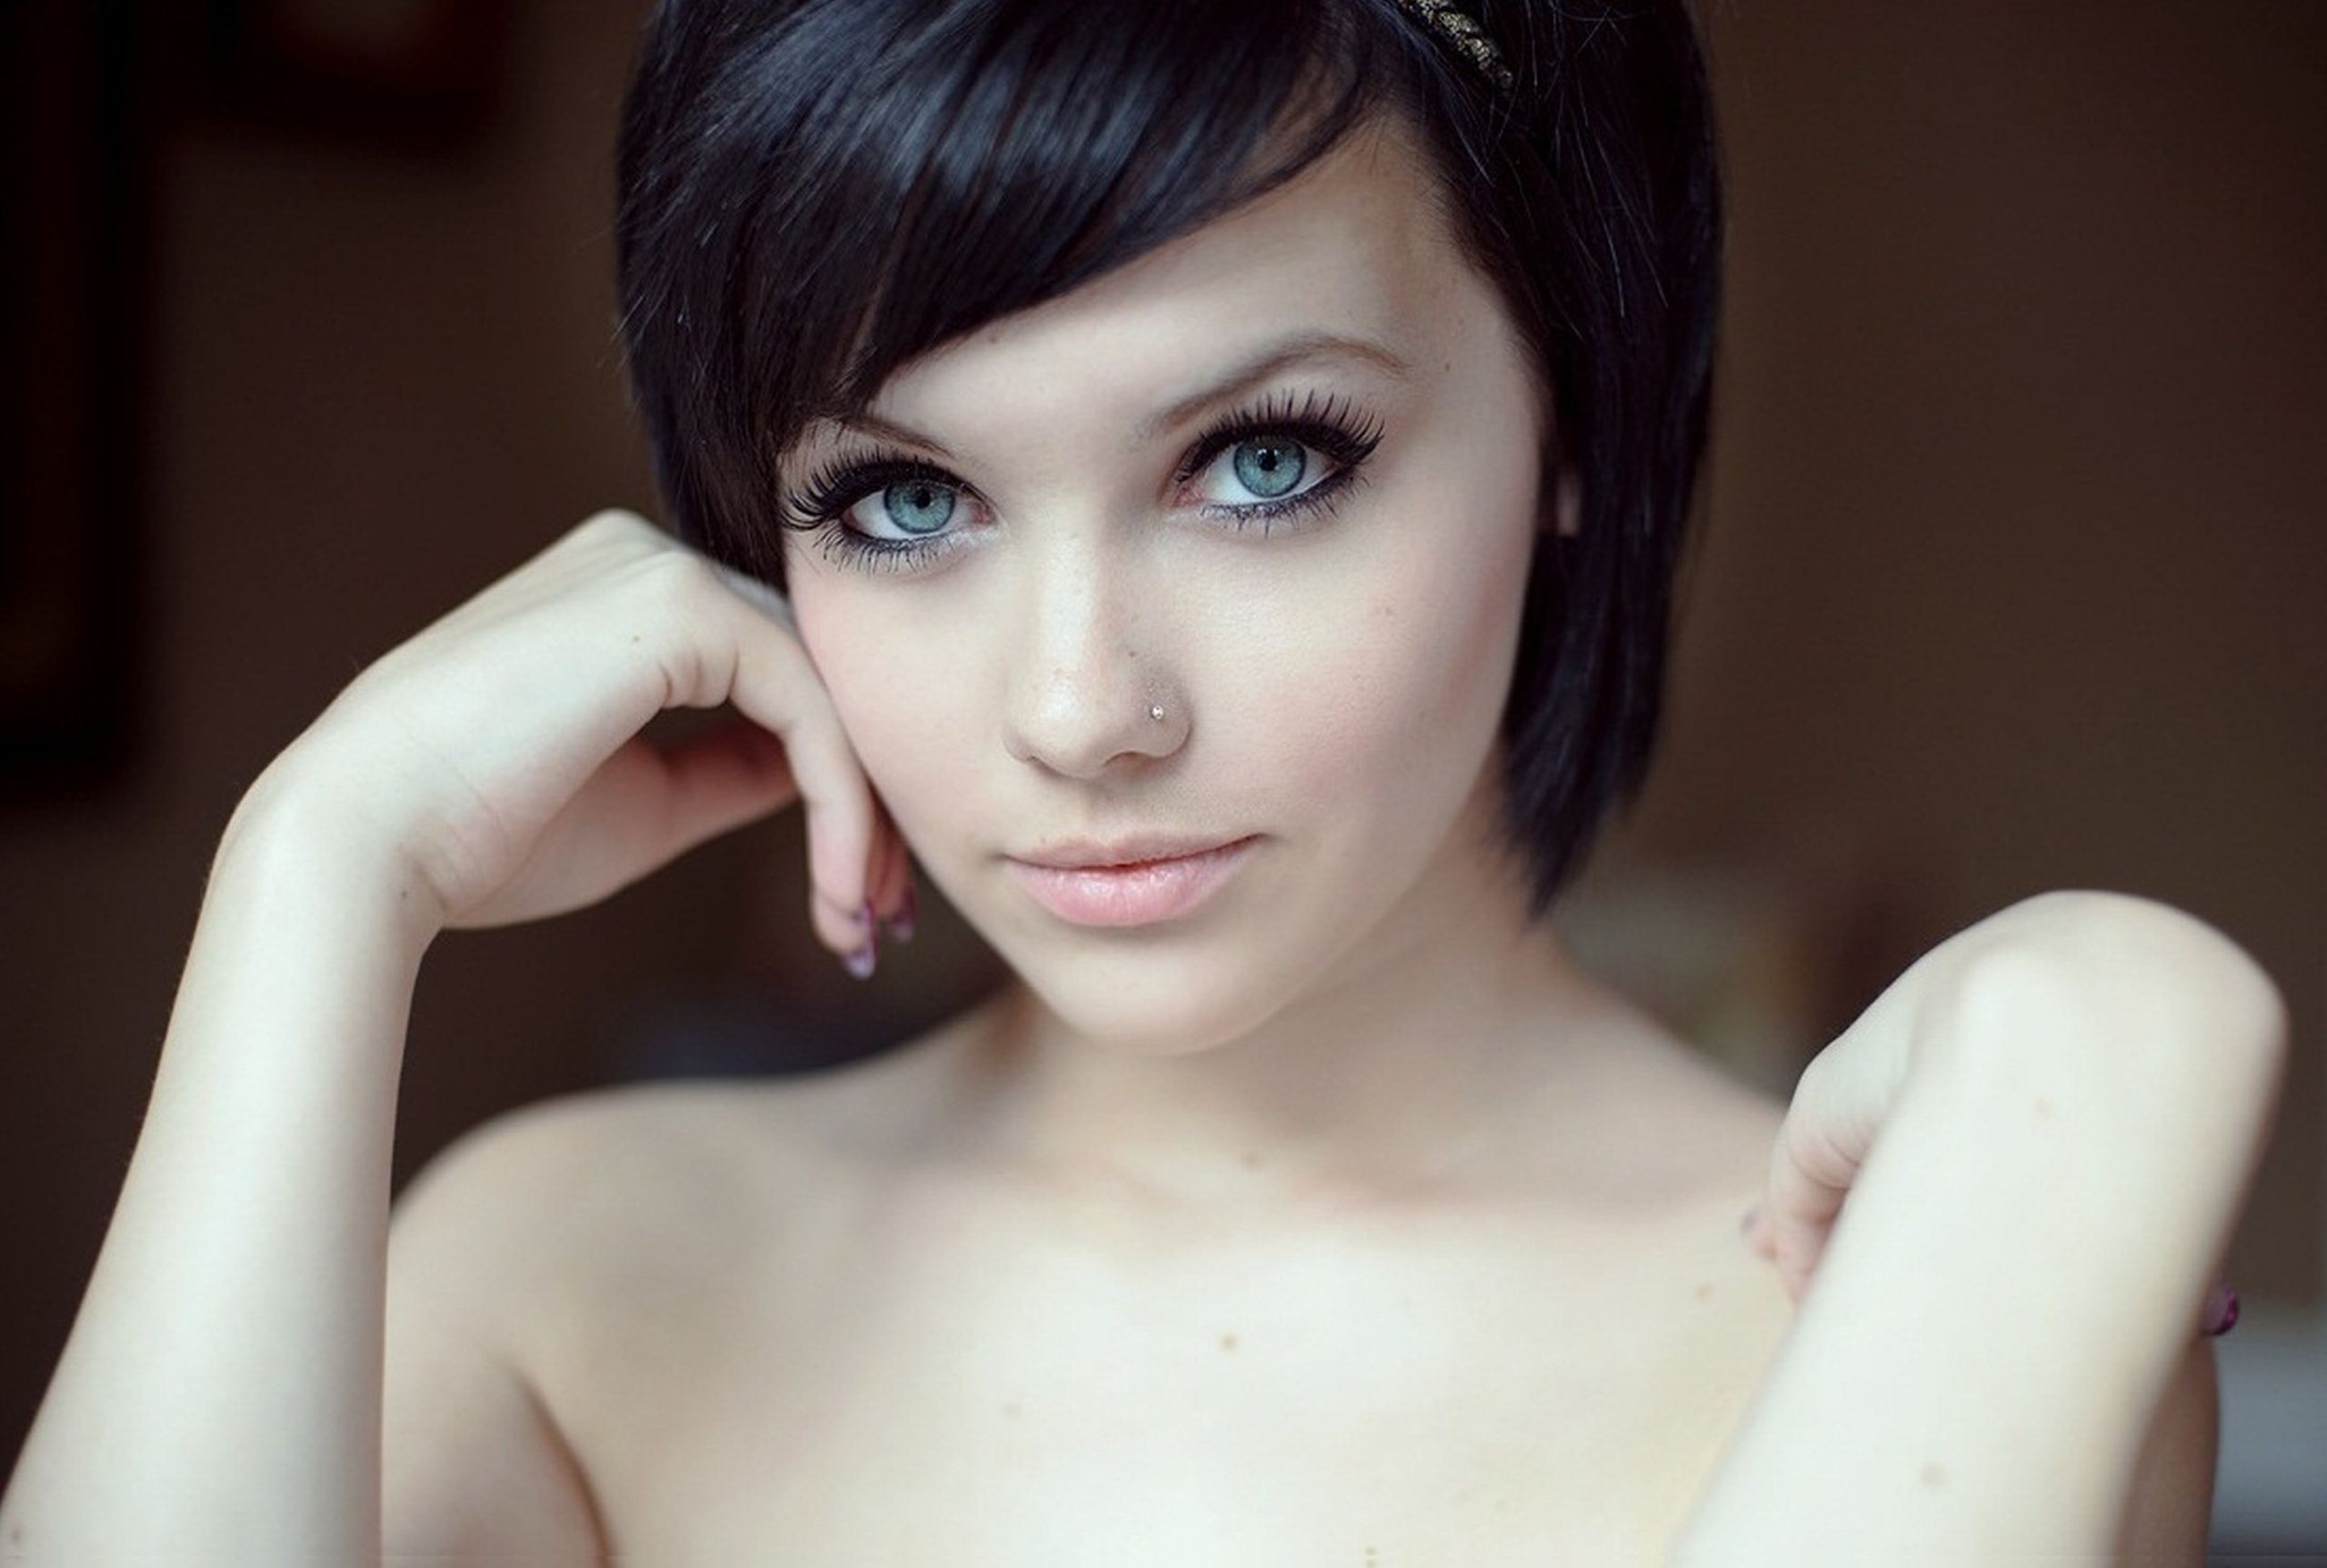 Dark-haired woman with blue eyes wearing a cozy sweater - wide 9